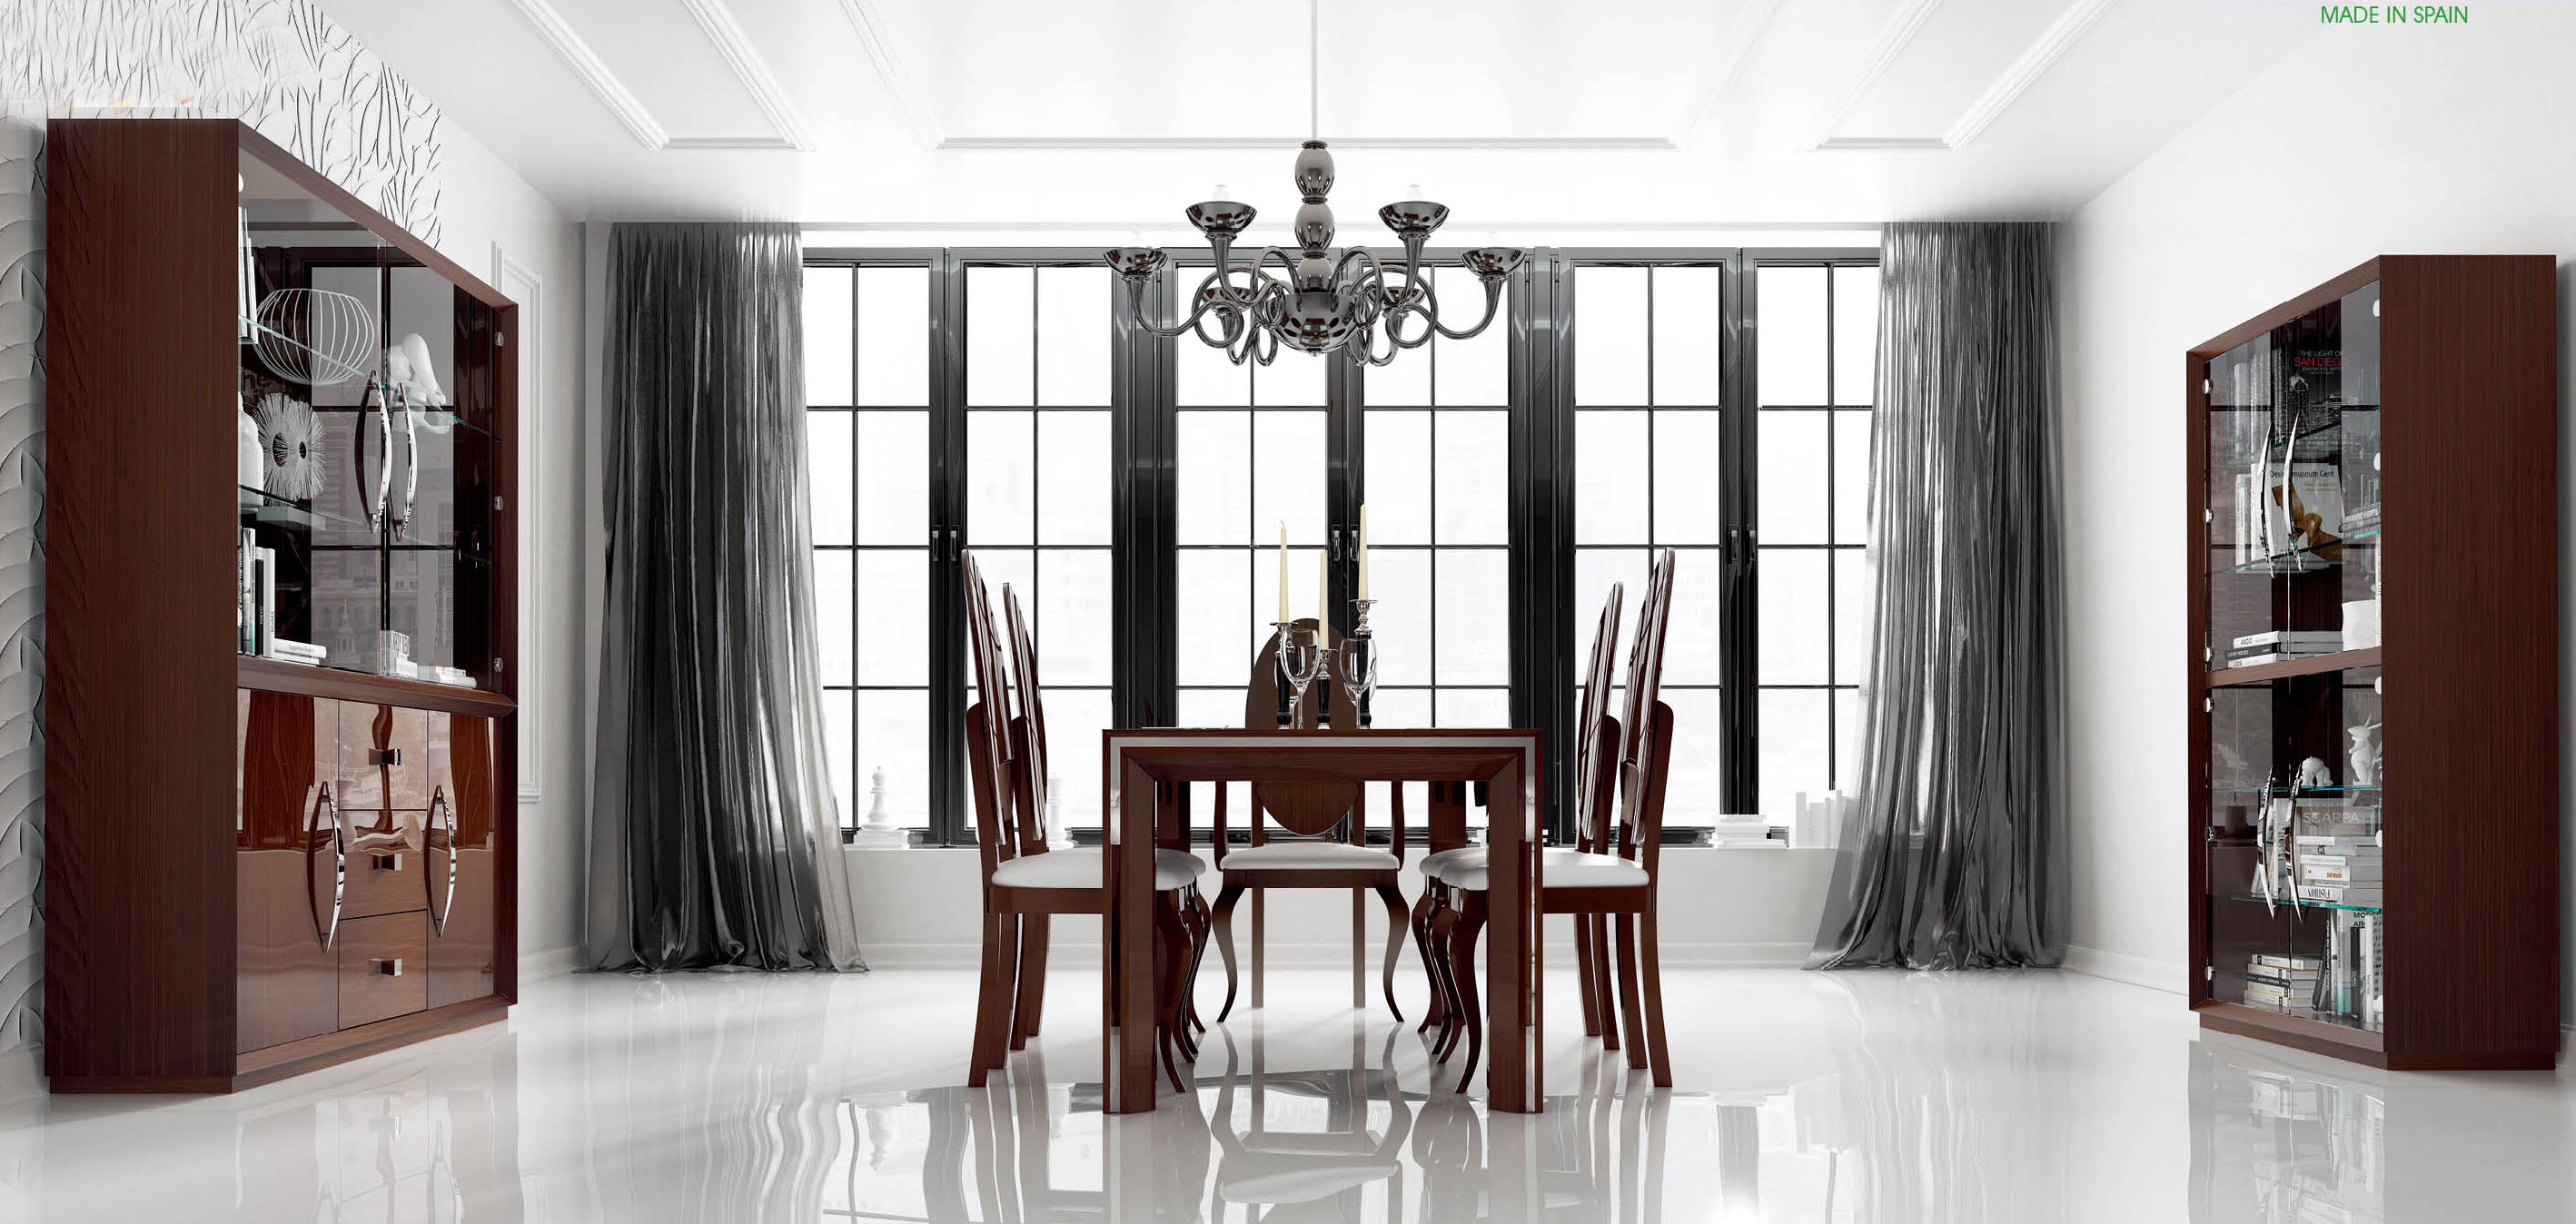 Luxurious Rectangular in Wood Fabric Seats Complete Dining Room Sets - Click Image to Close